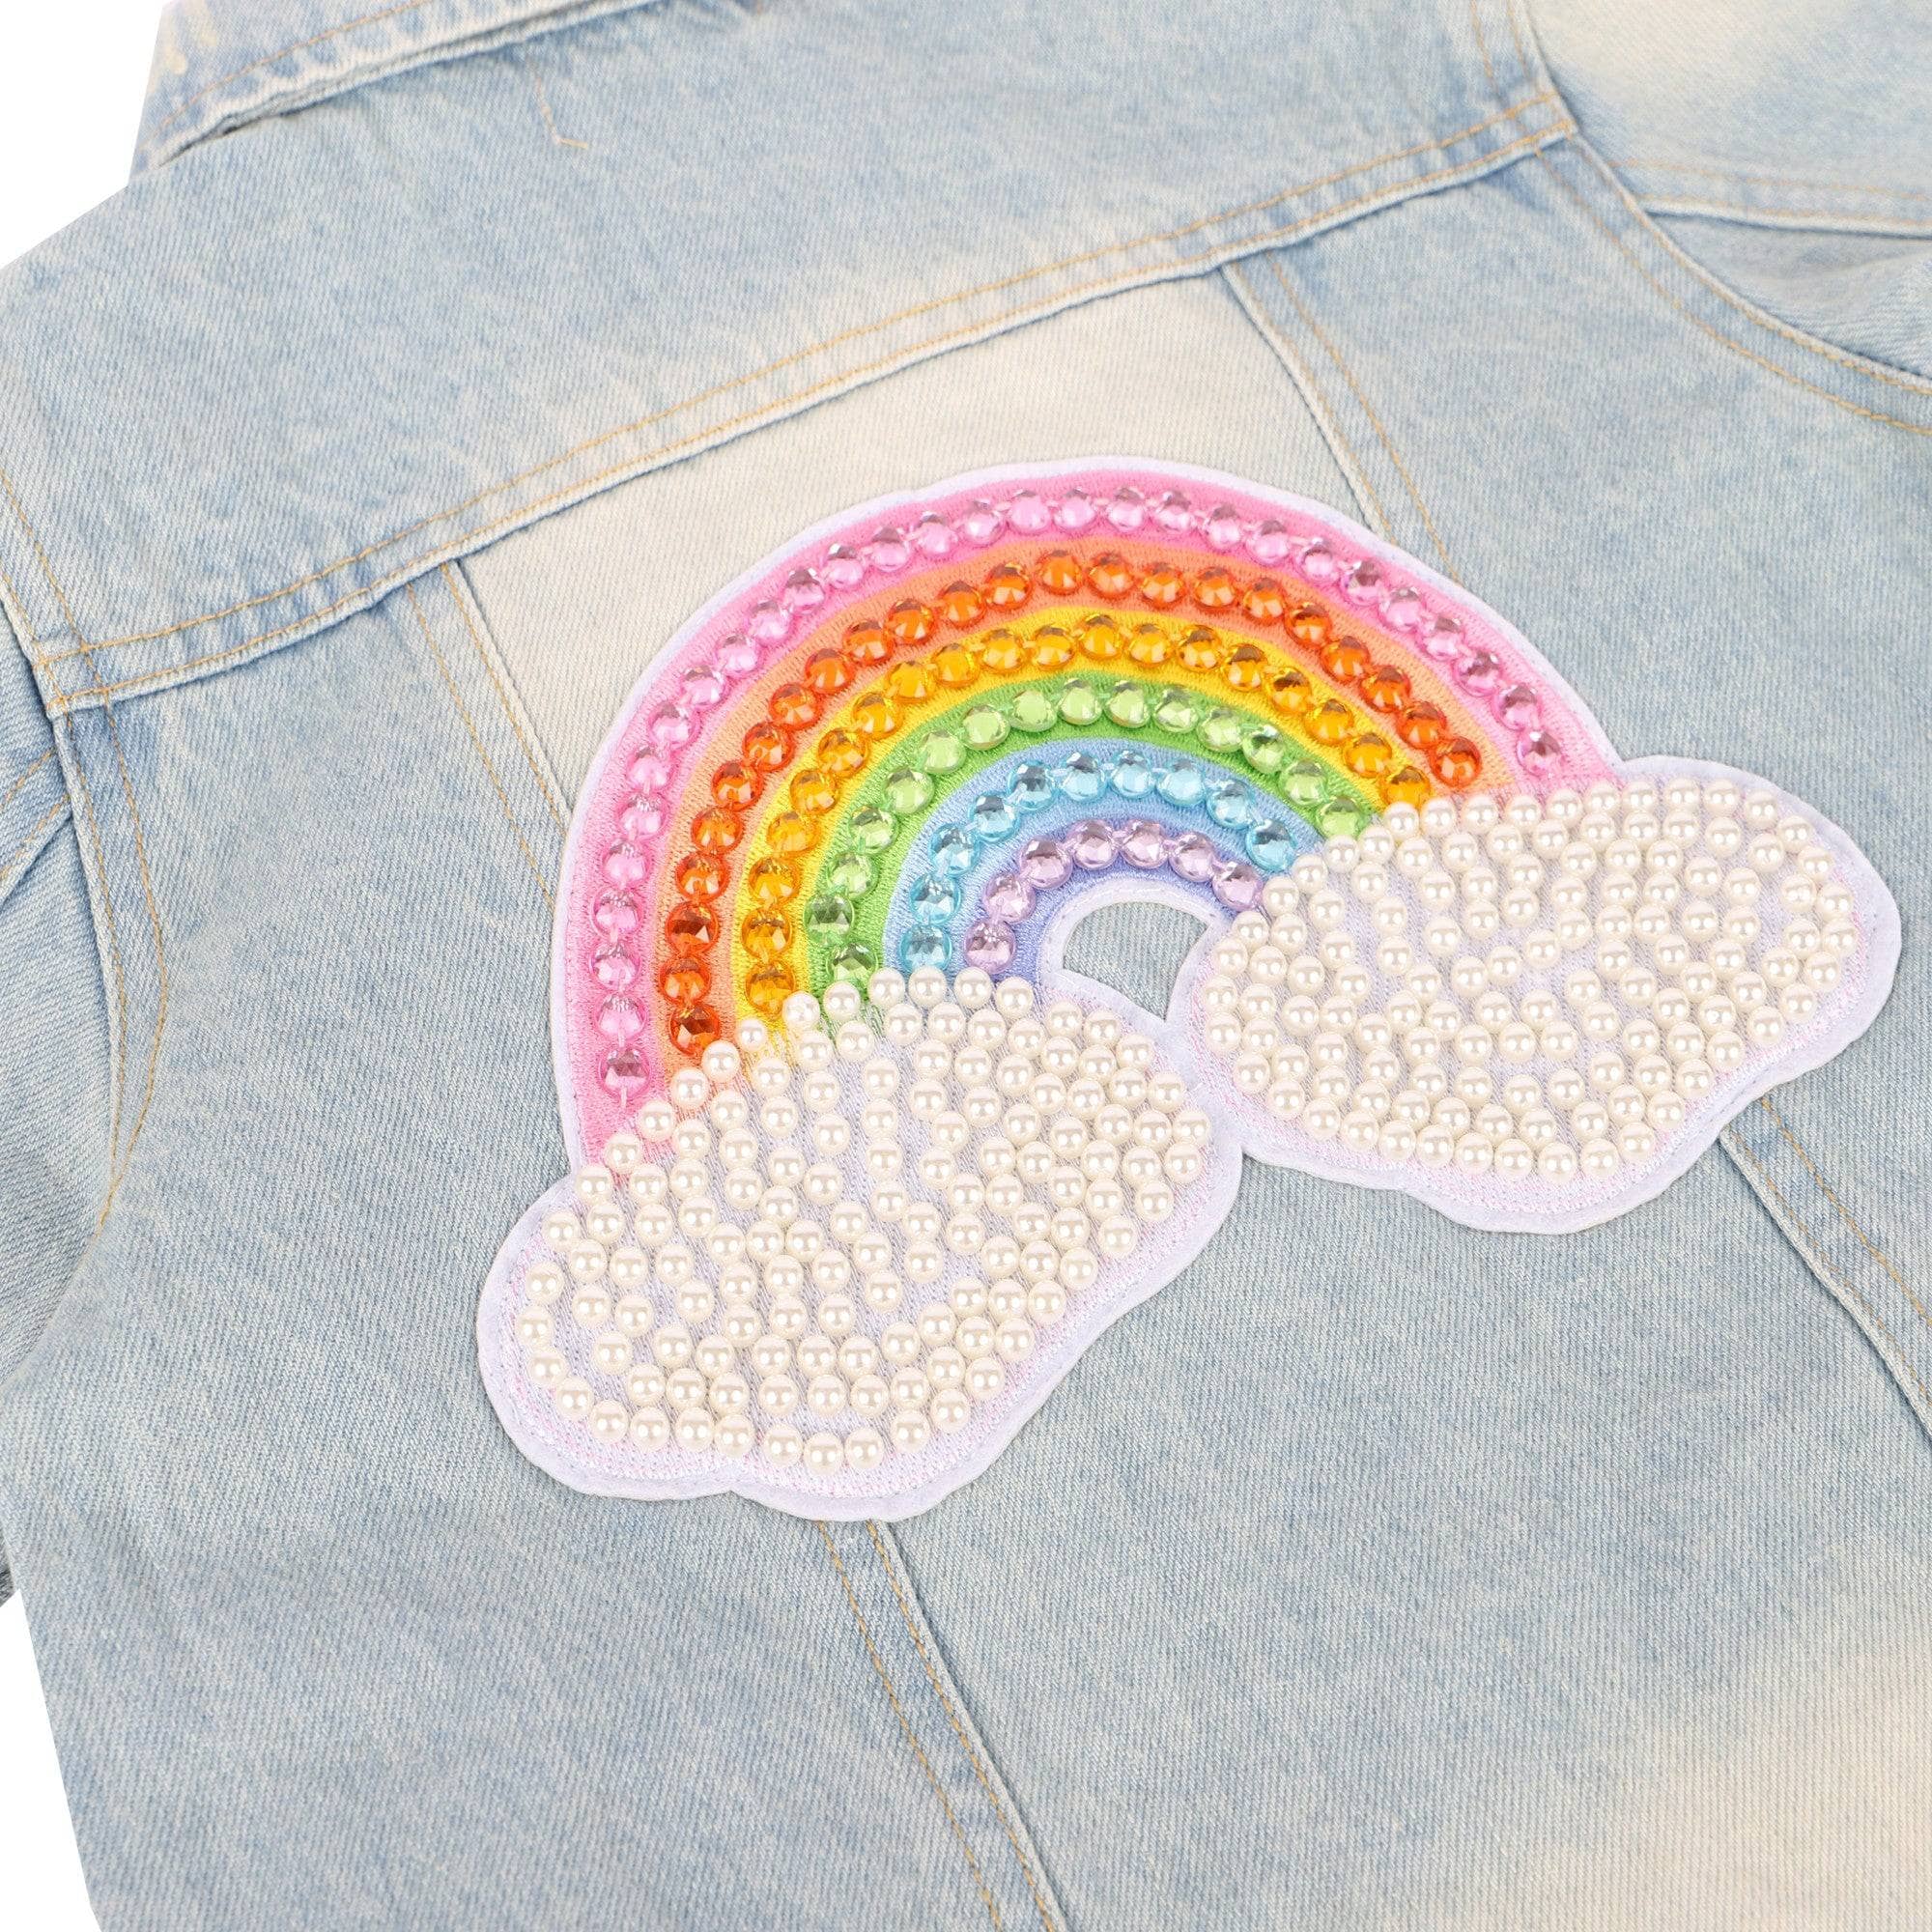 Lola & The Boys Girl's All About The Patch Denim Jacket